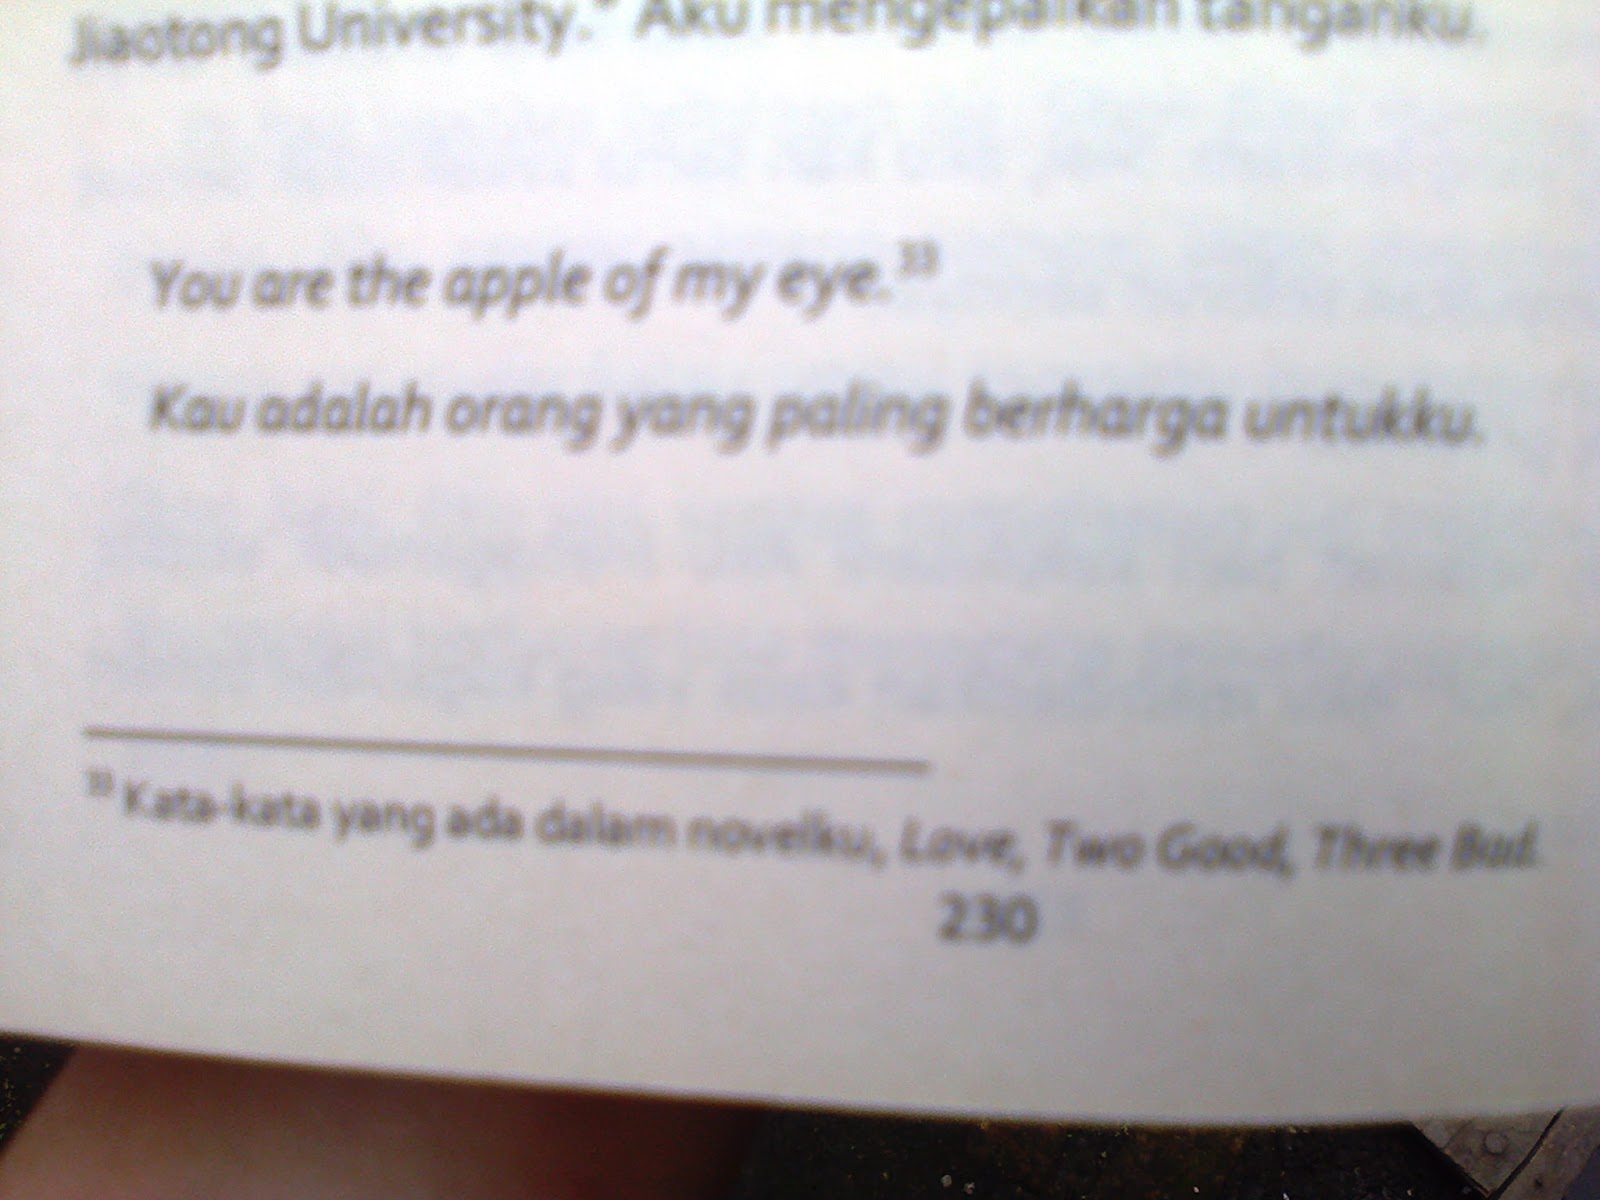 ebook novel indonesia you are the apple of my eye